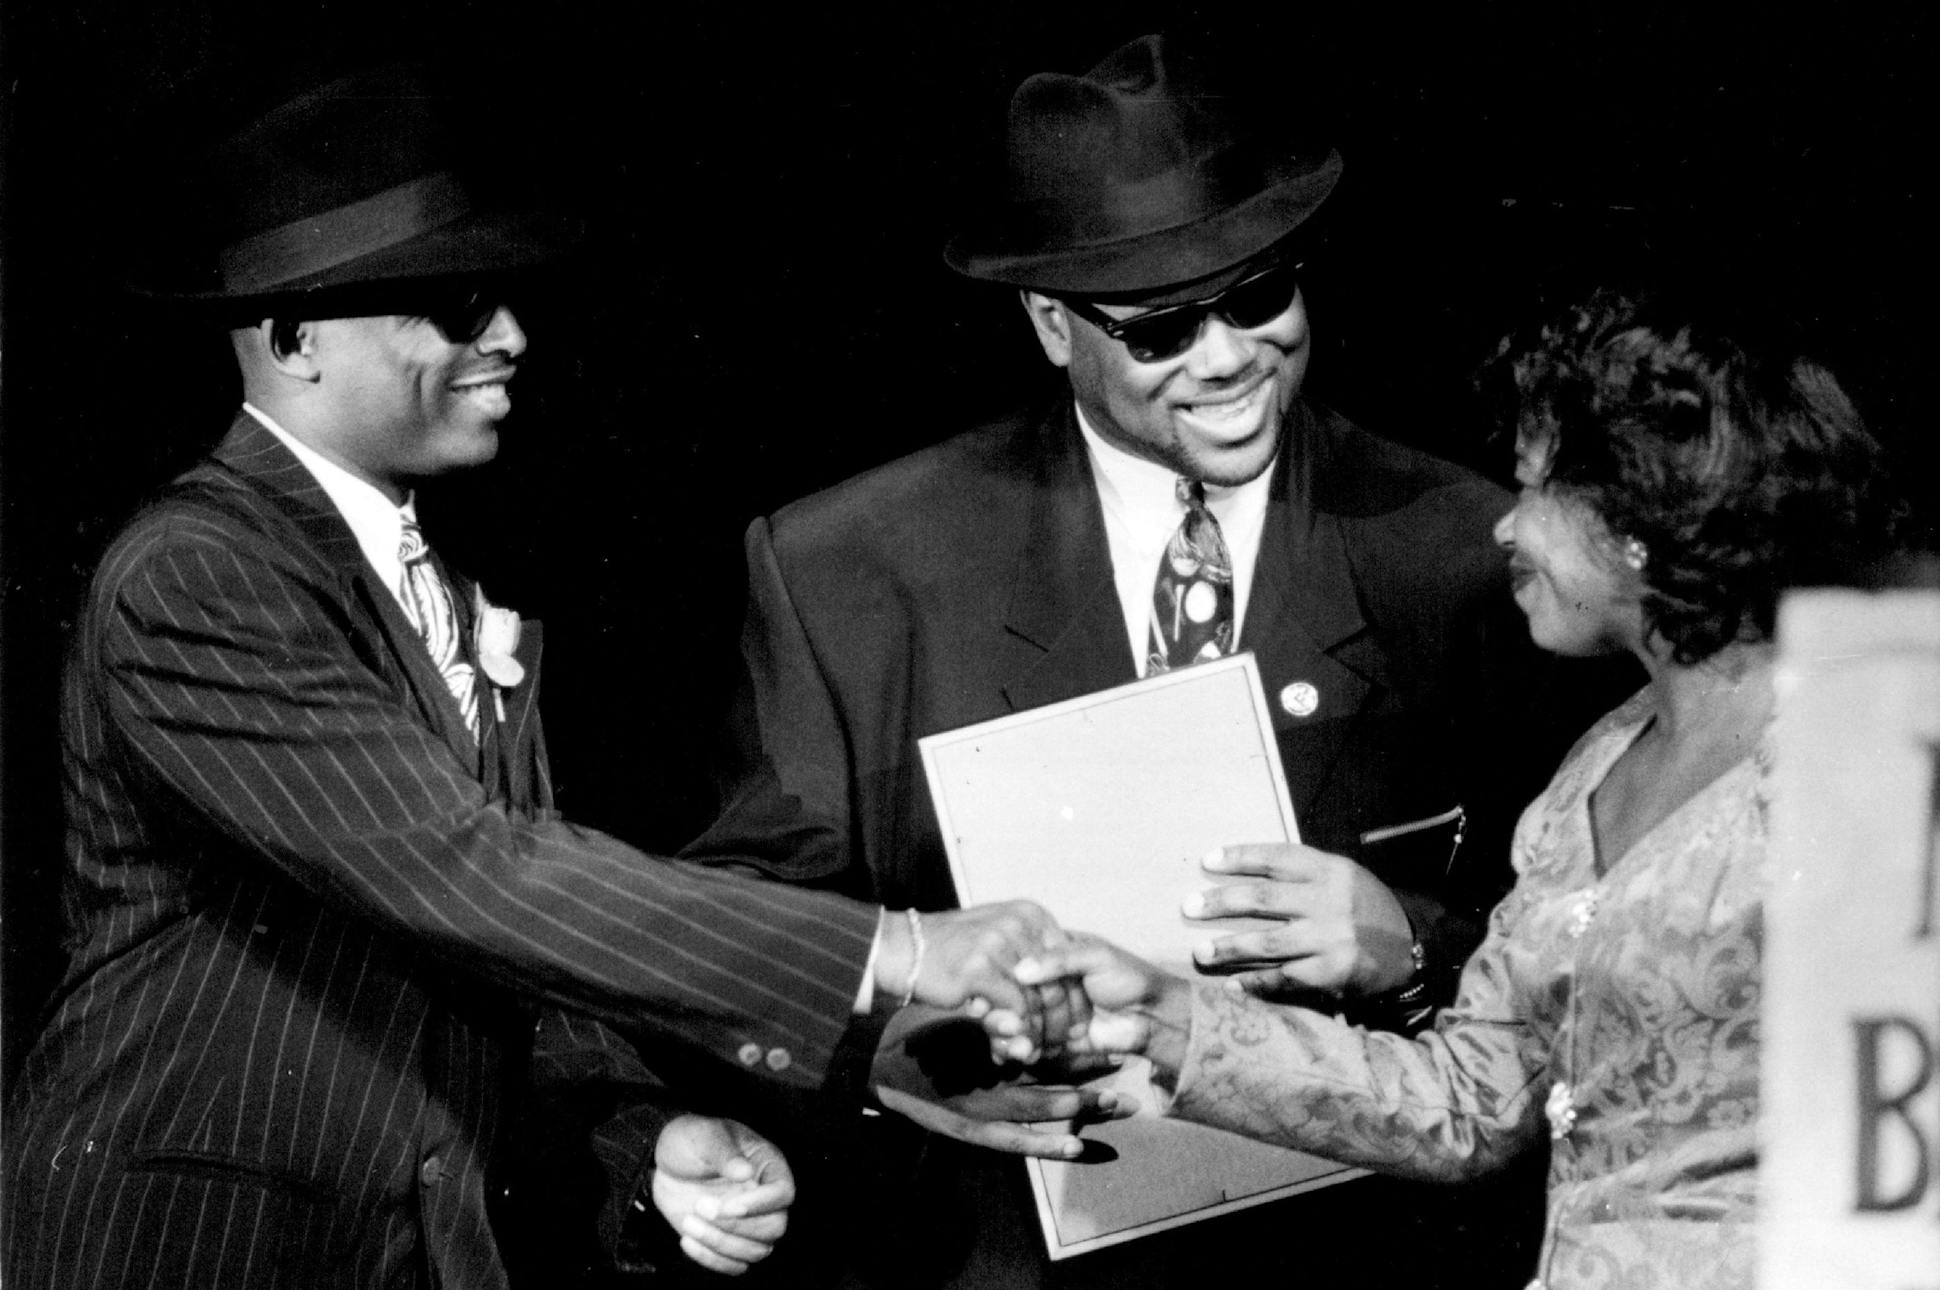 Terry Lewis and Jimmy Jam received the keys to the city from Minneapolis City Council President Sharon Sayles Belton in 1992.